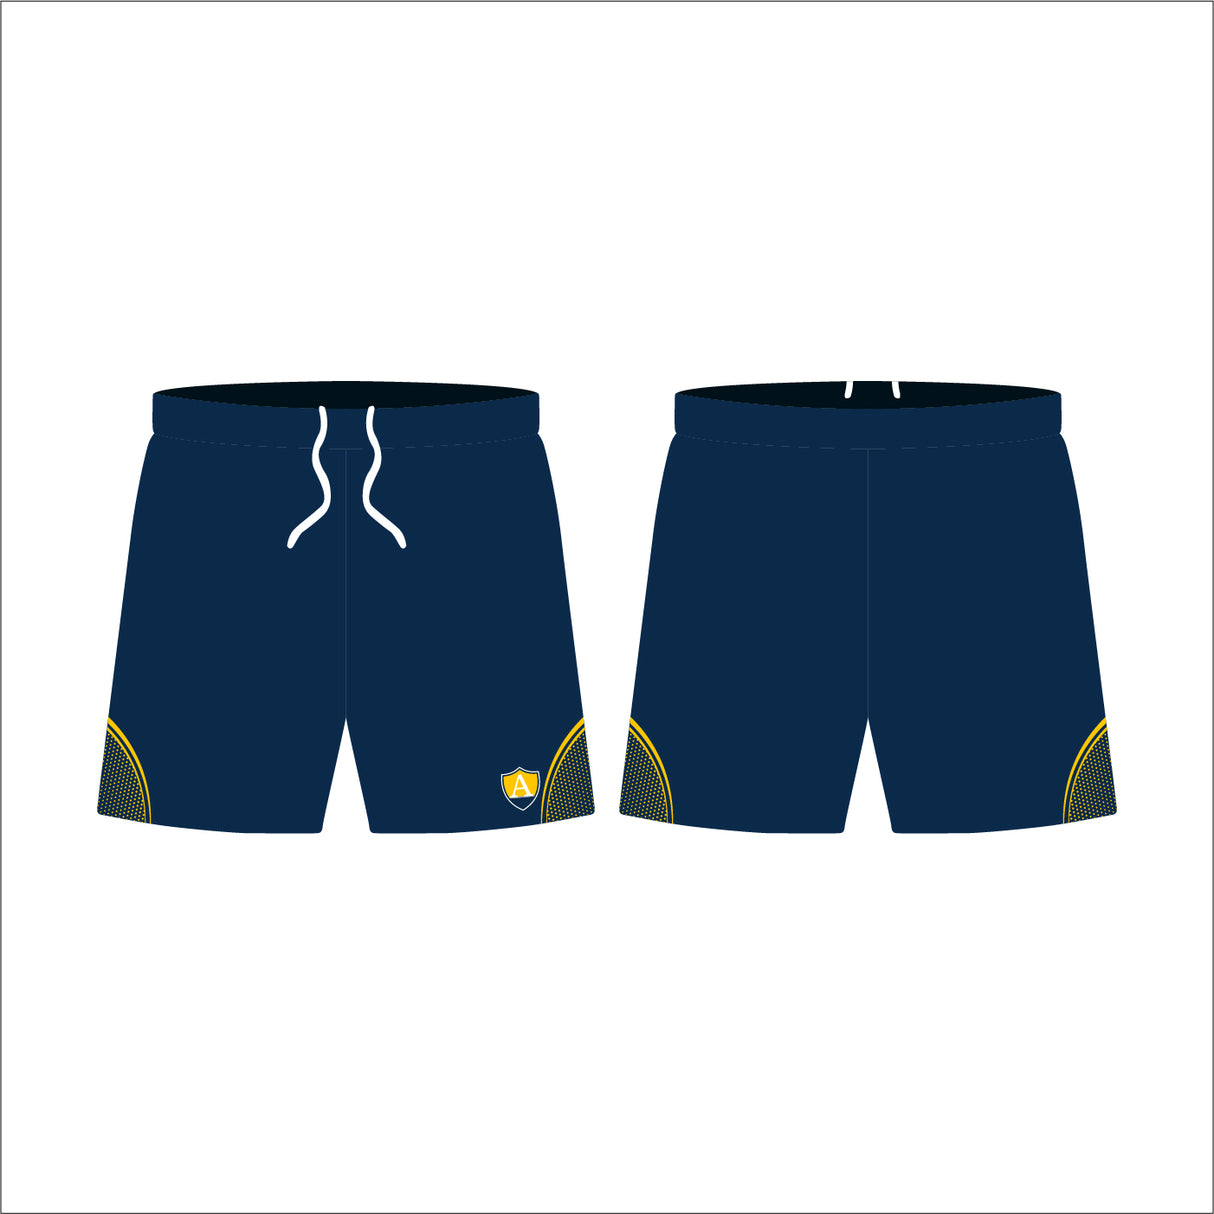 Amity Jammers for MEN